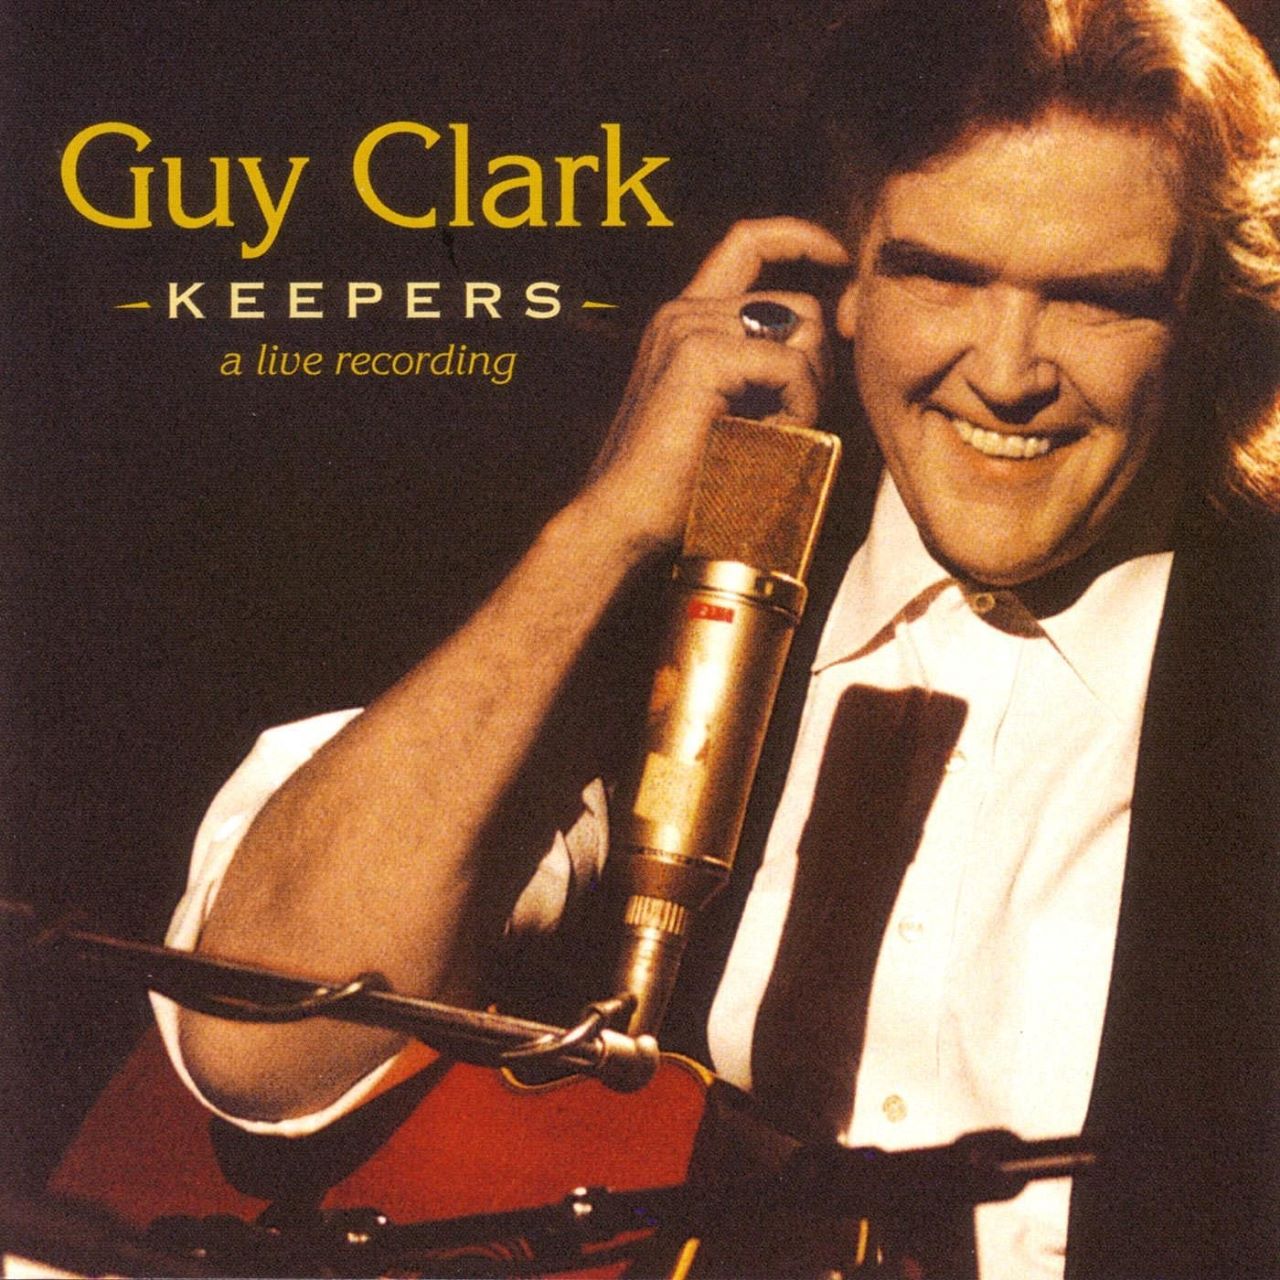 Guy Clark - Keepers - A Live Recording cover album